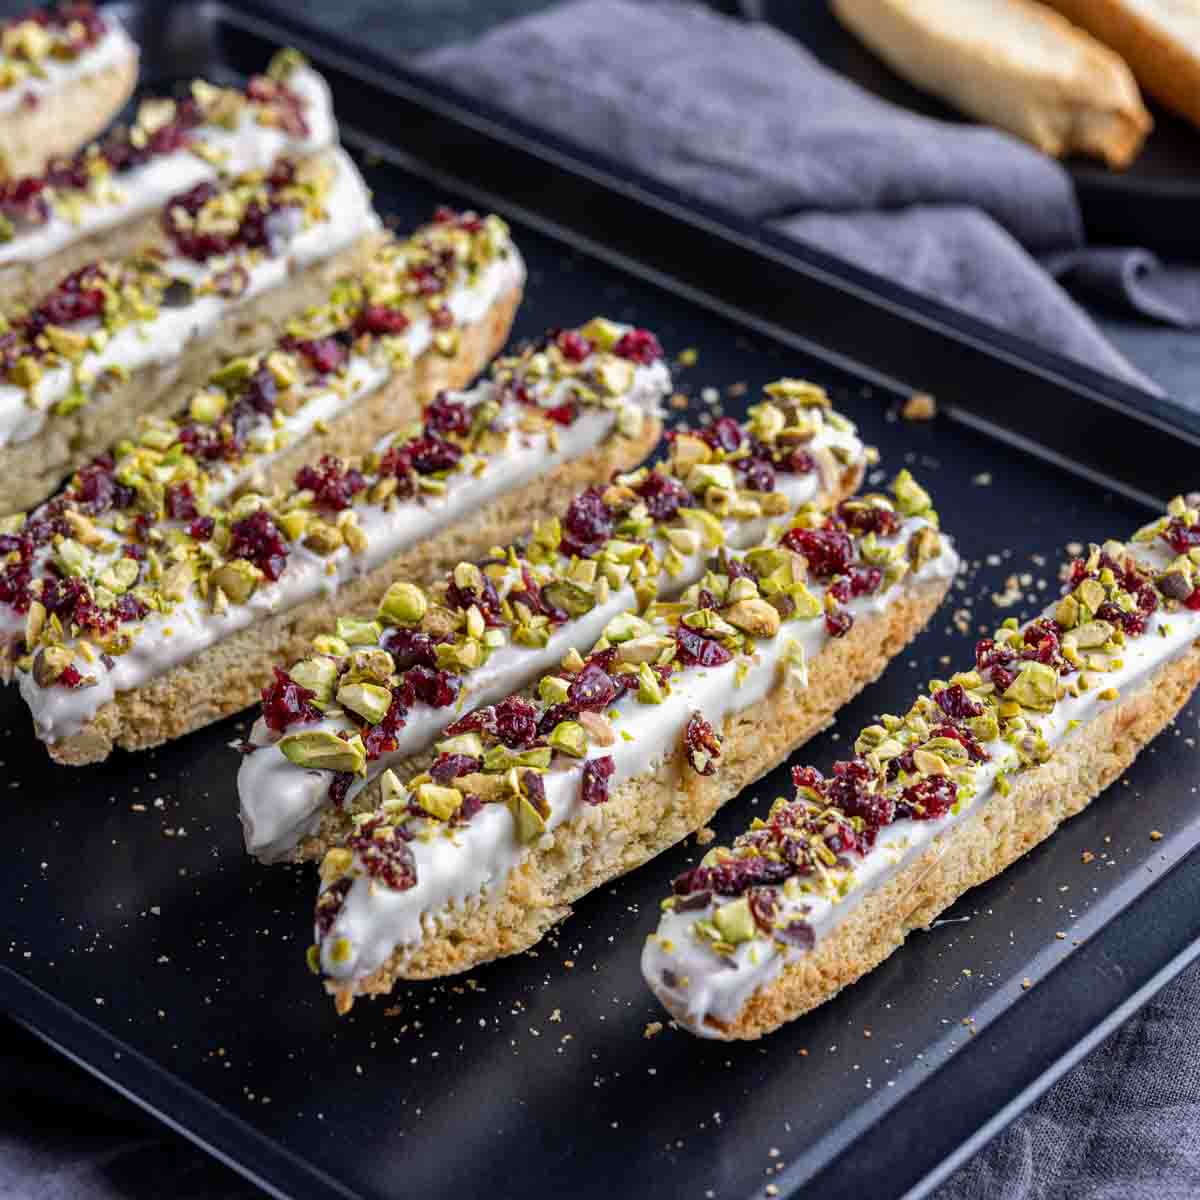 white chocolate dipped almond biscotti with cranberries and pistachios on a black sheet pan